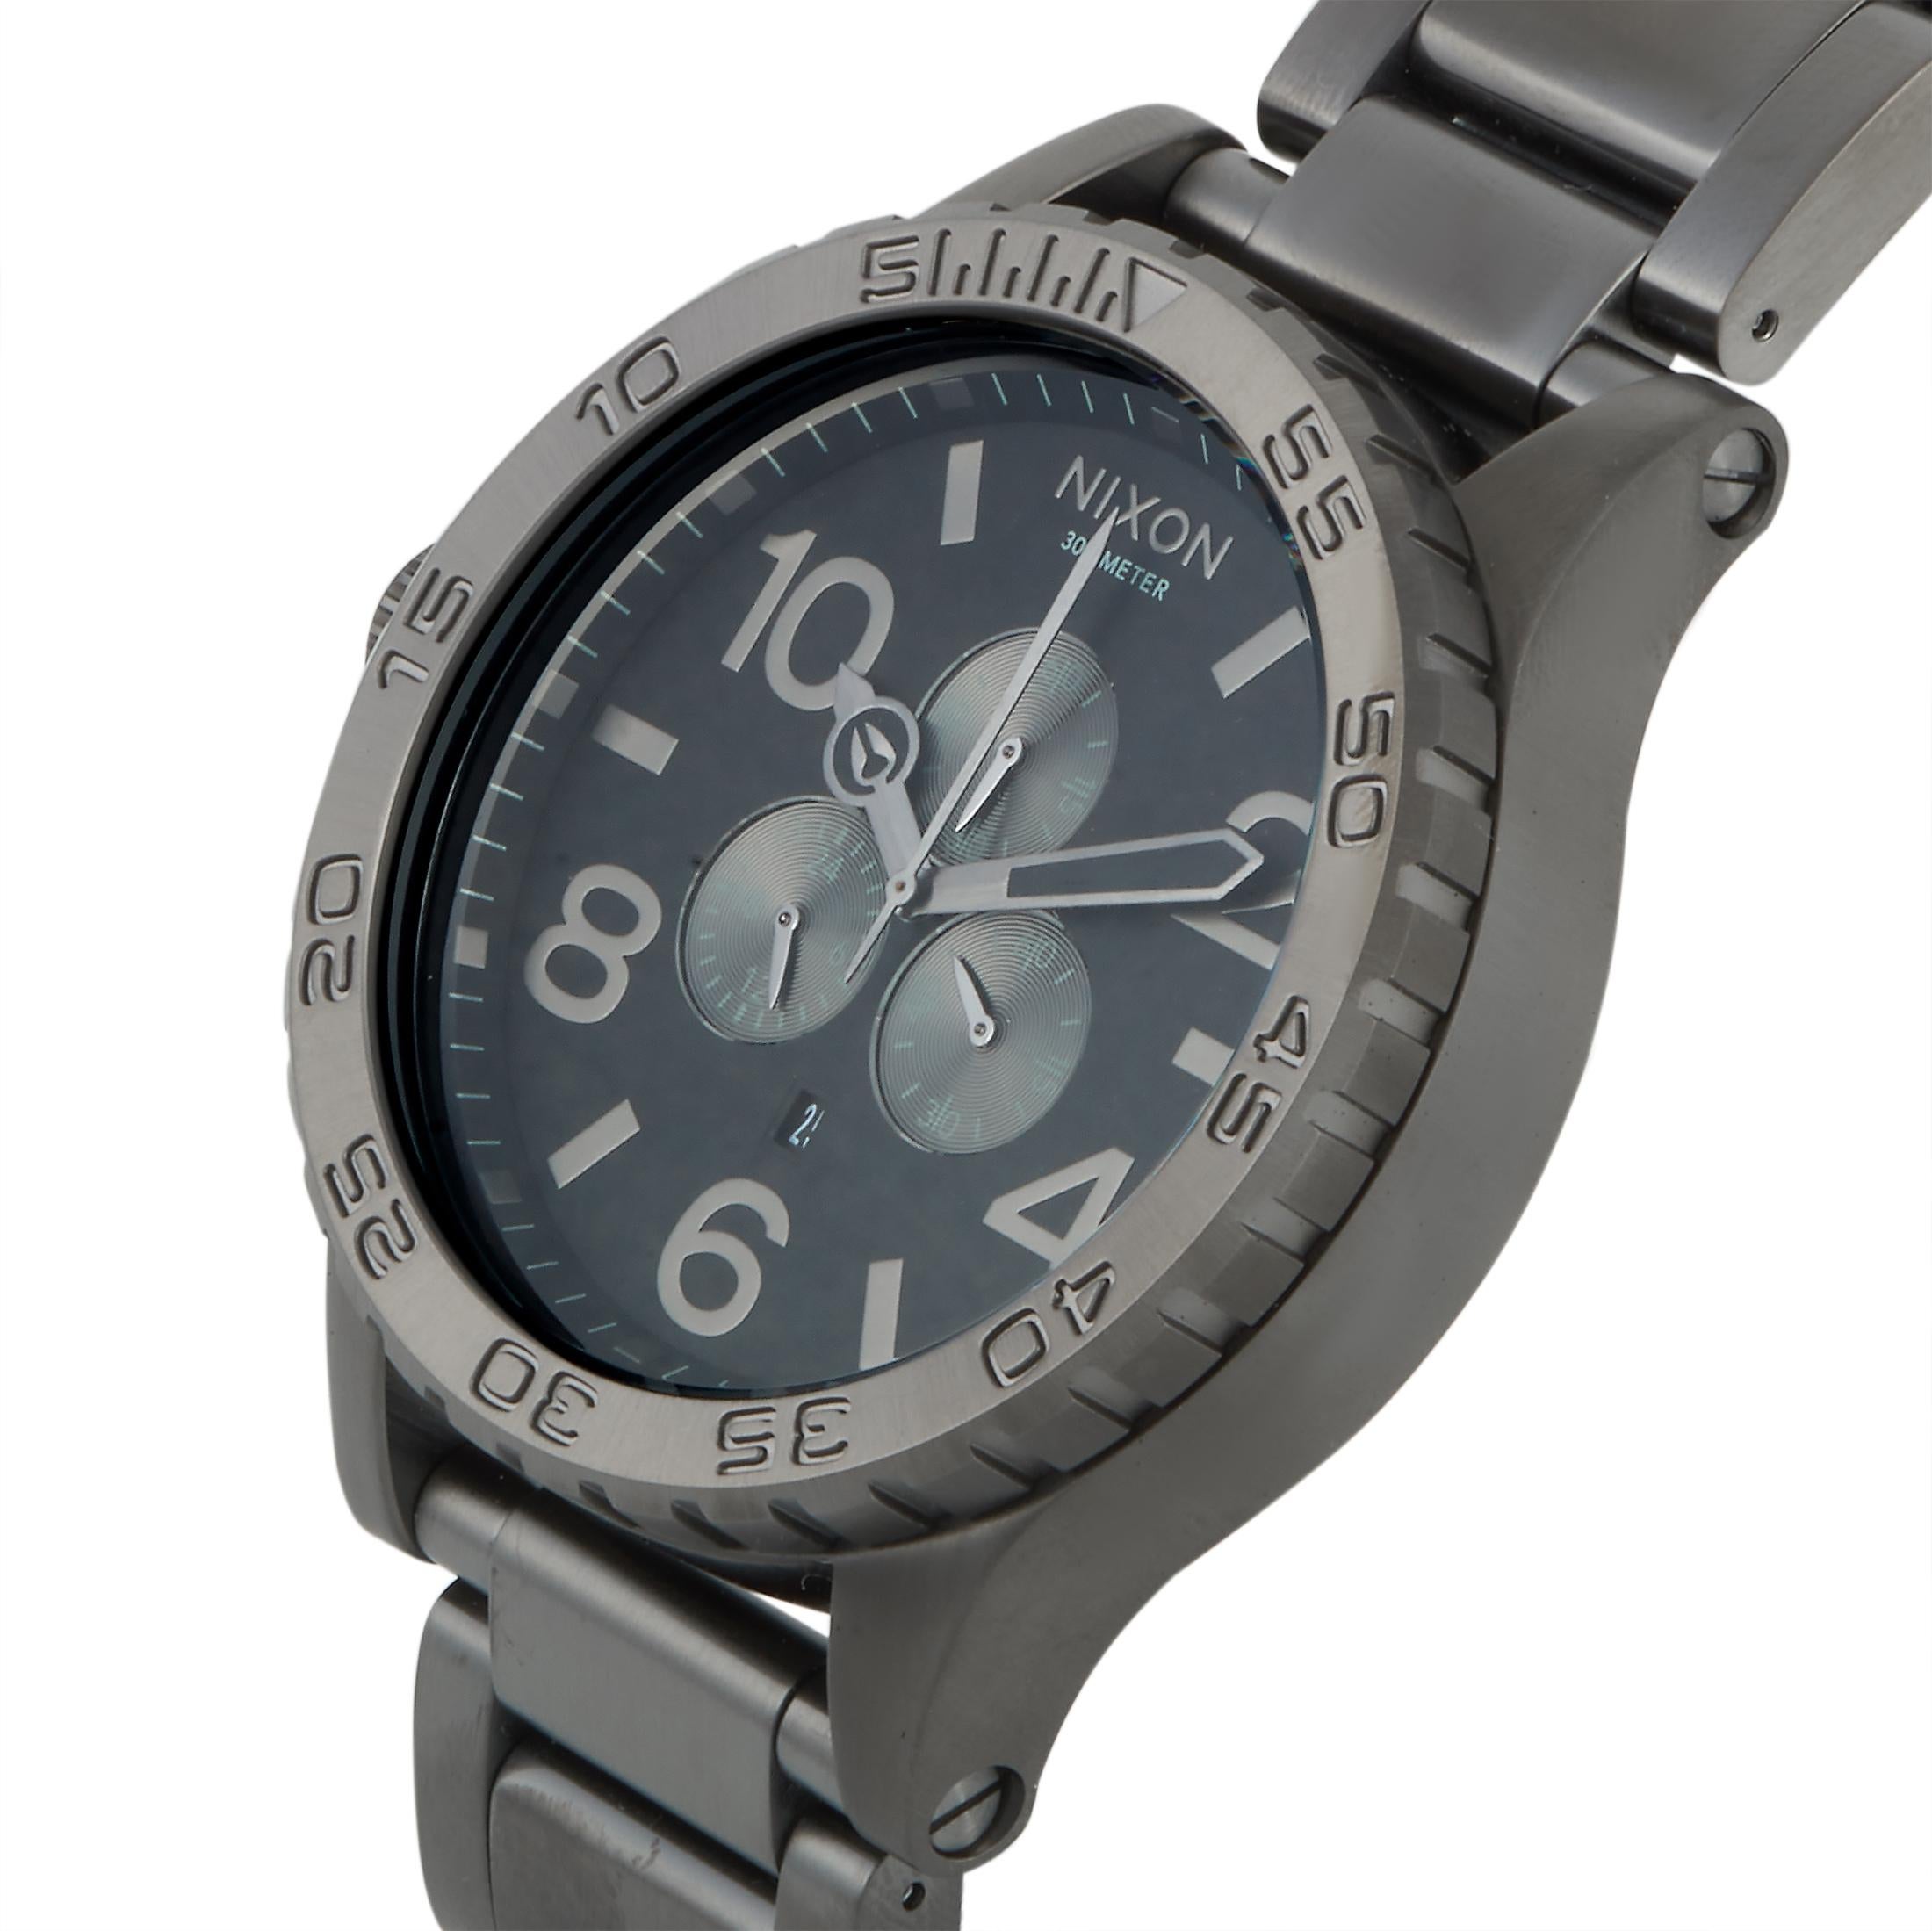 This is the Nixon 51-30 Chrono All Gunmetal watch, reference number A083-632-00.

It is powered by a Miyota quartz movement and on the gunmetal dial with Arabic numerals features the following functions: hours, minutes, chronograph, 24-hour